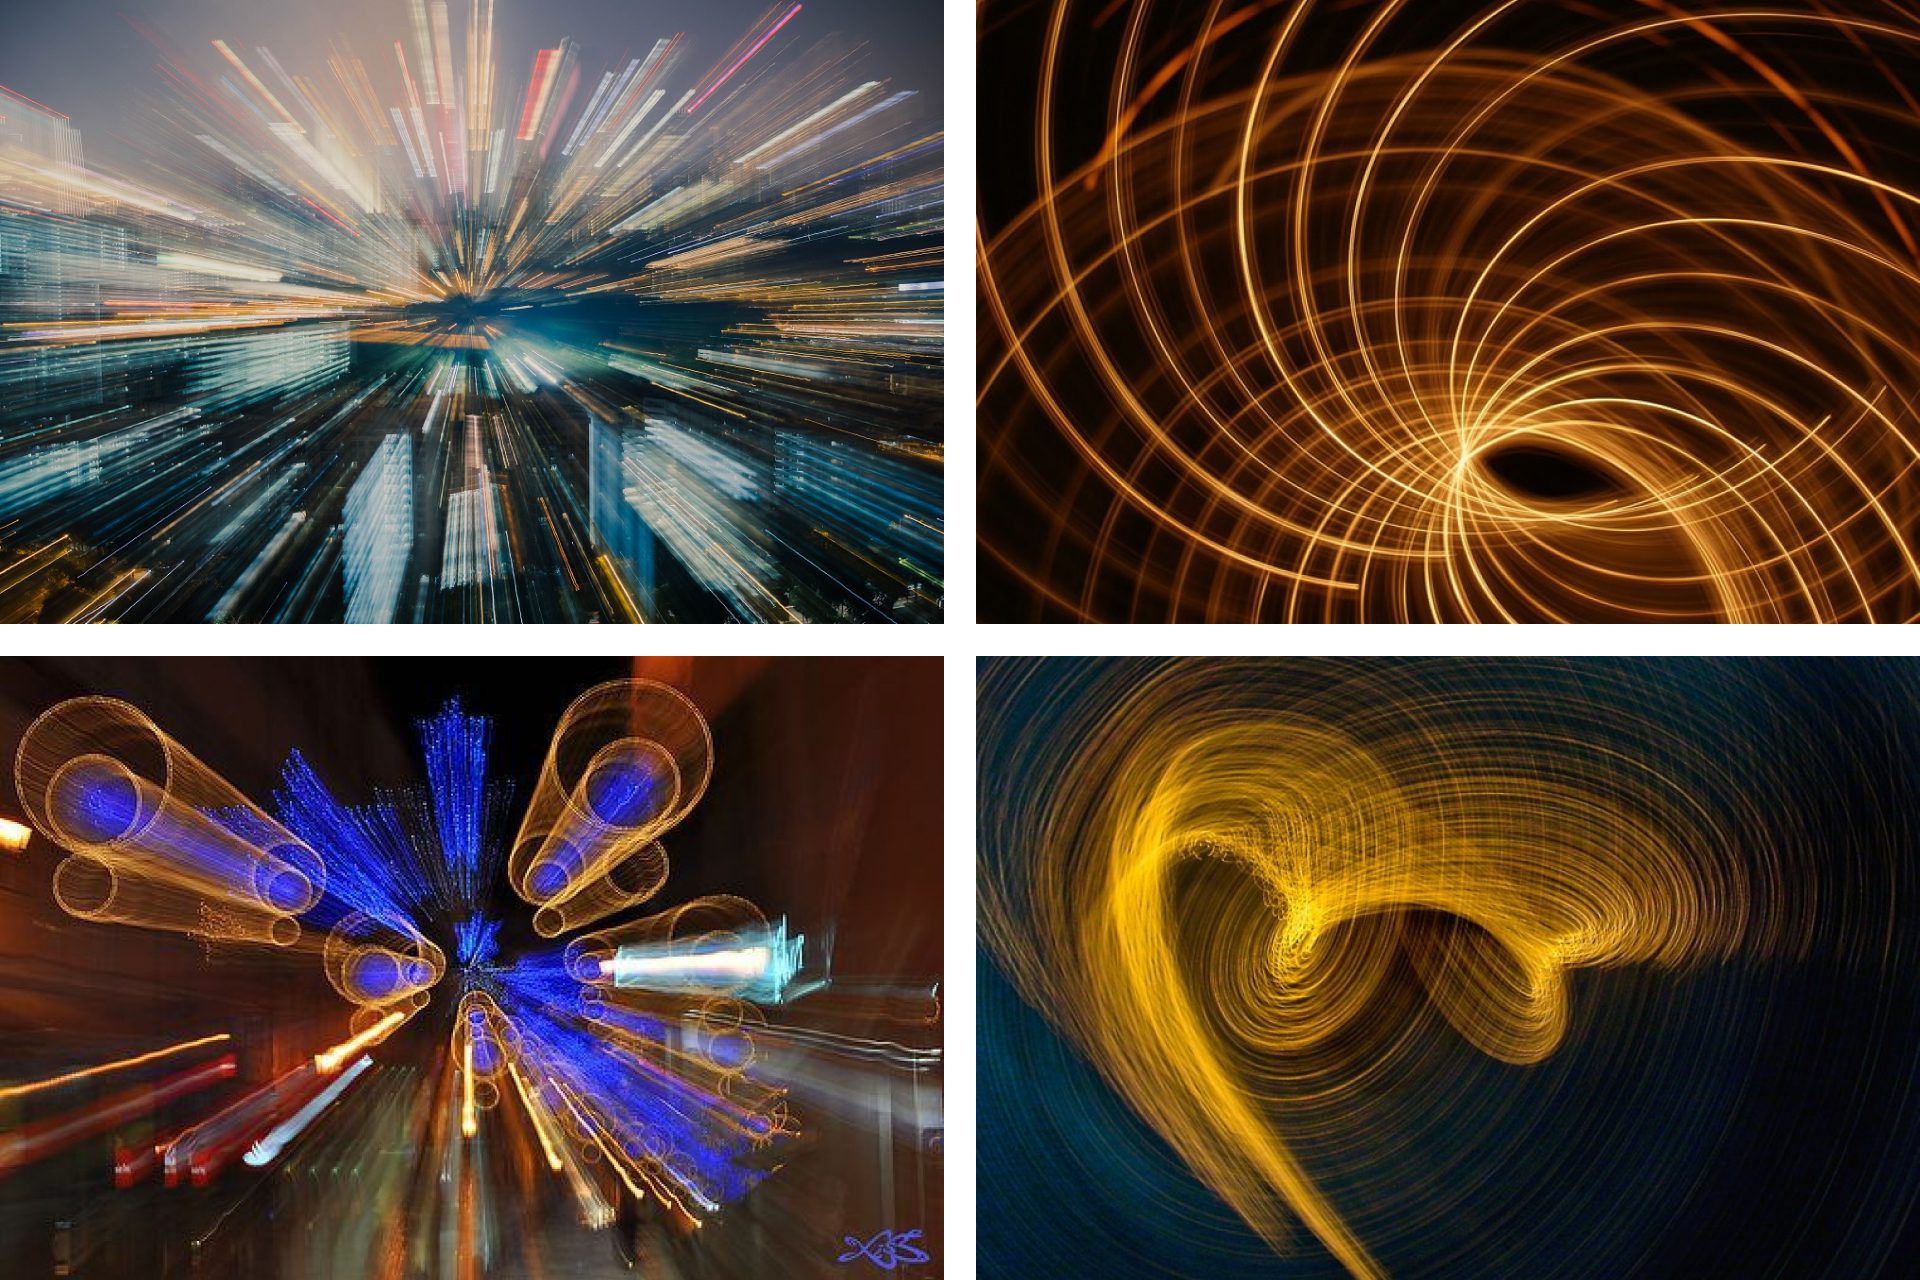 Kinetic Photography: Capturing Movement and Energy